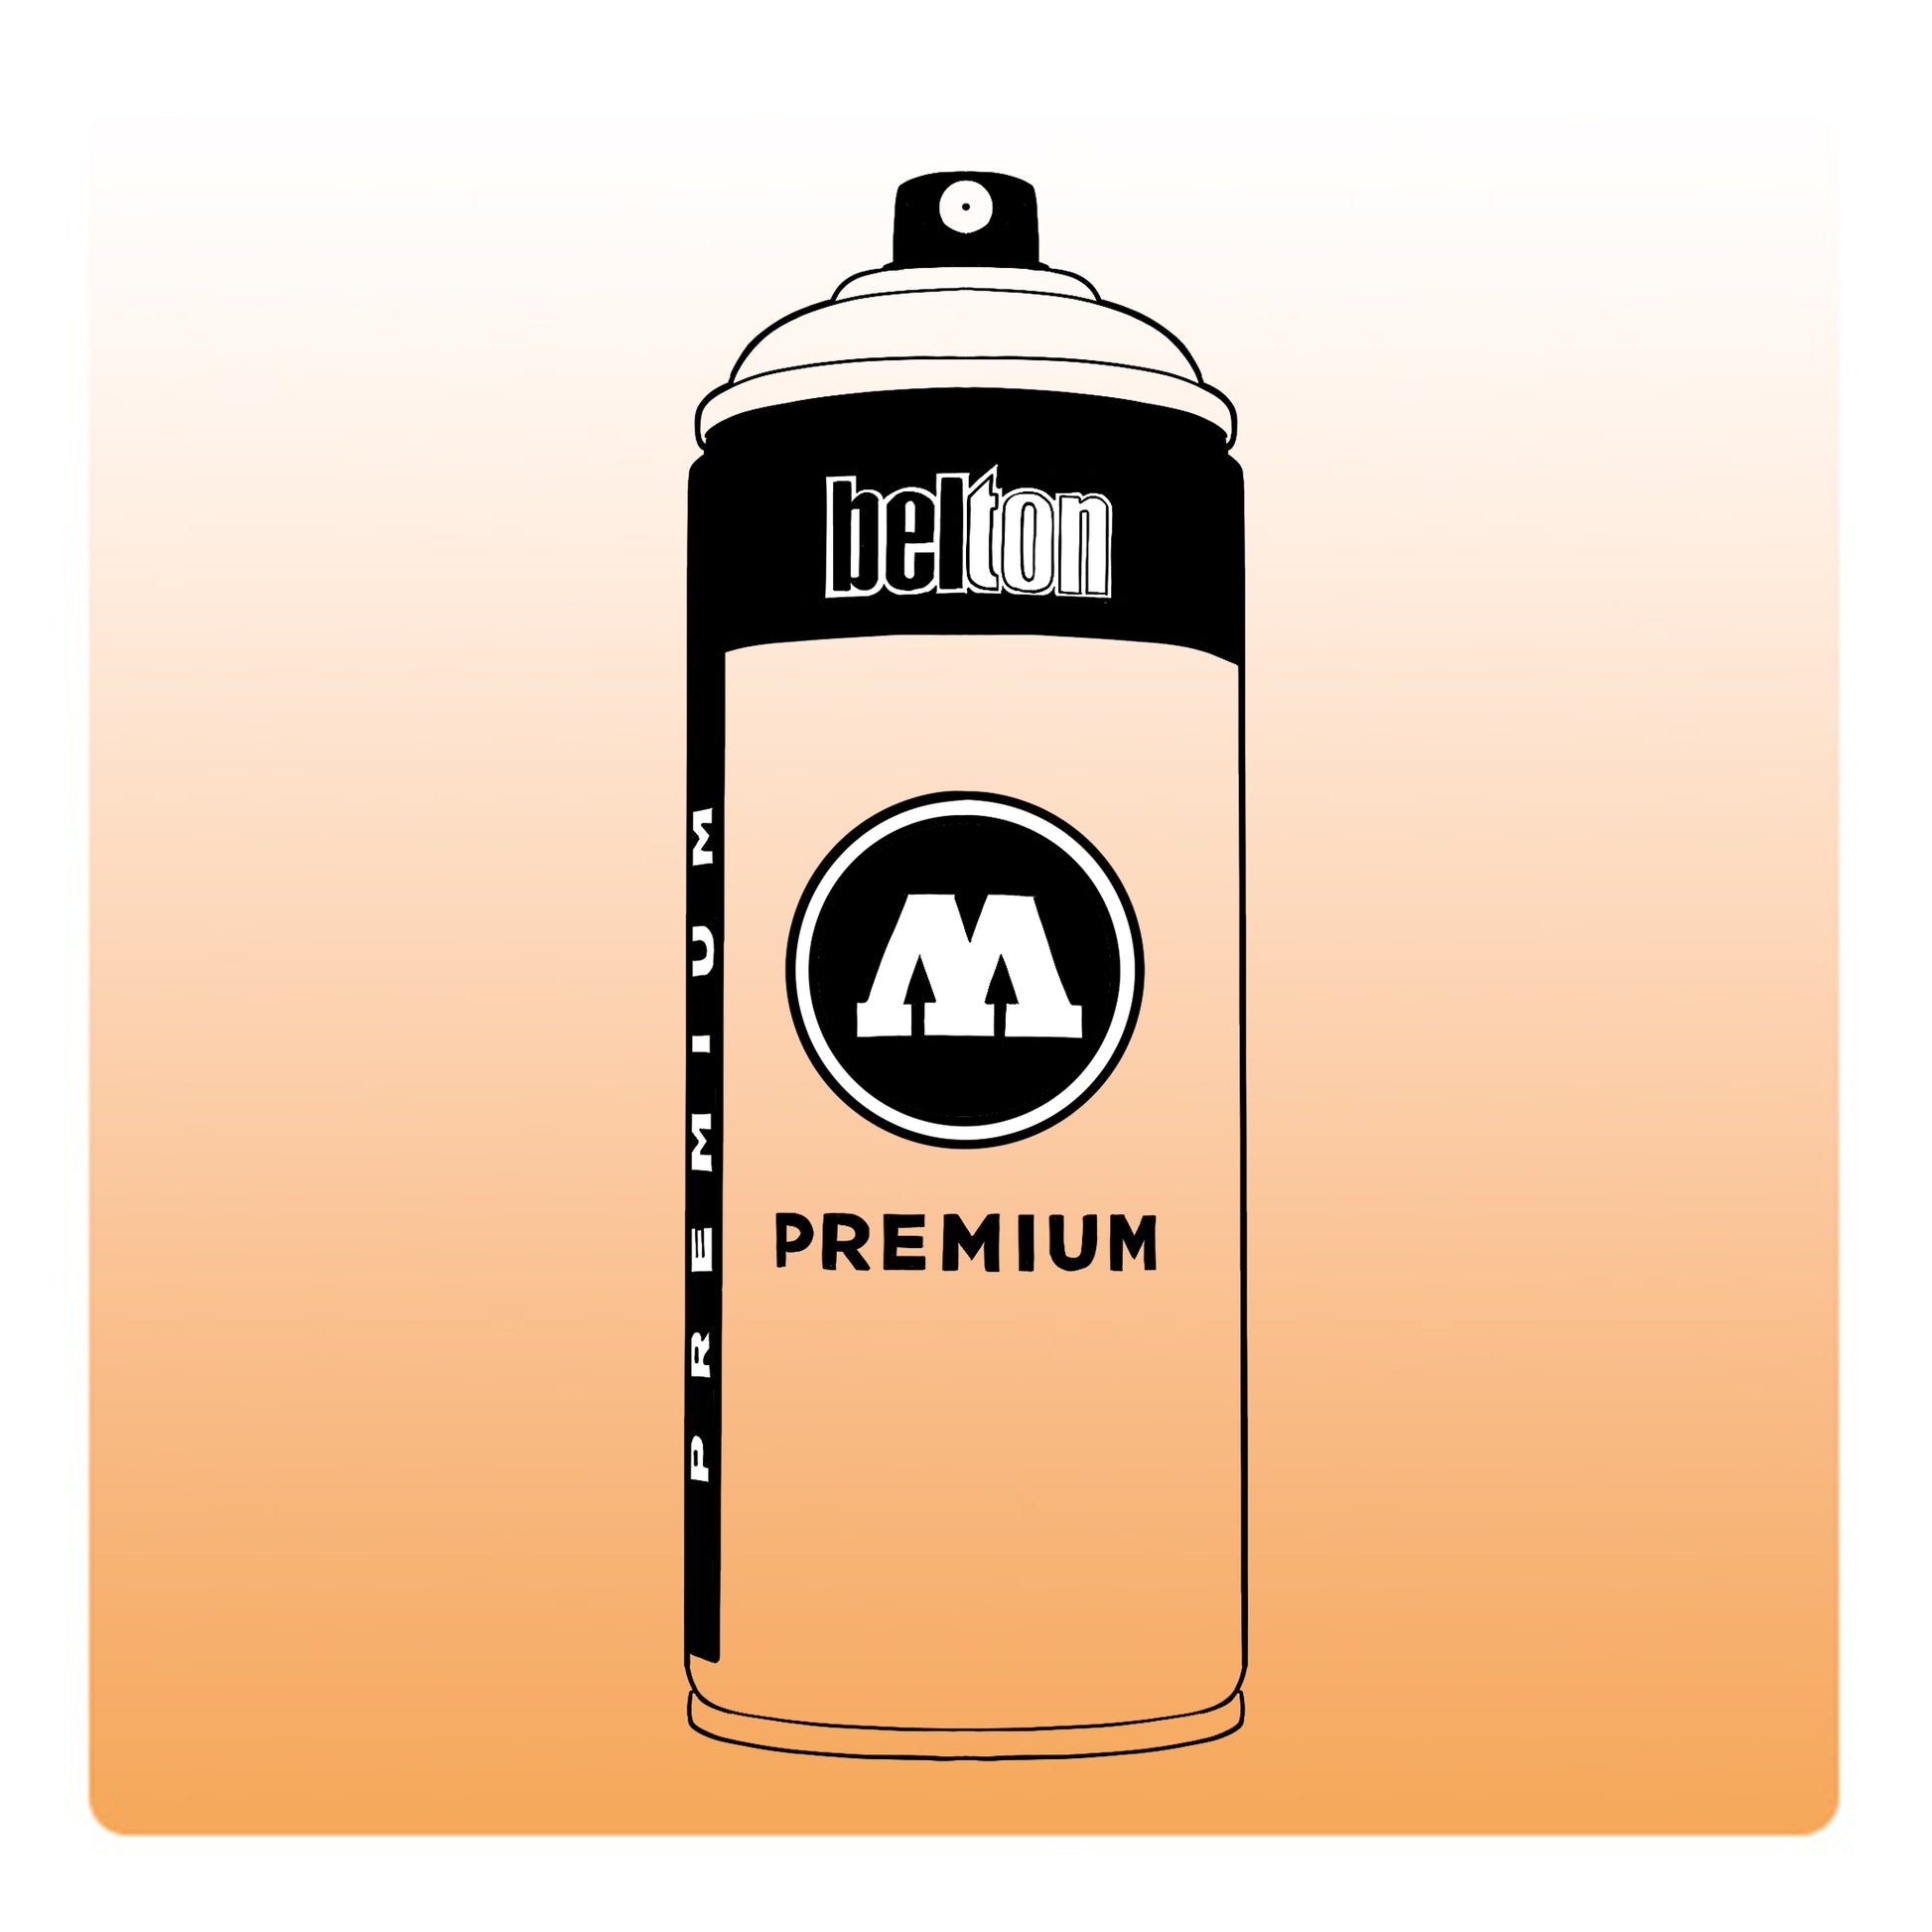 A line drawing of a spray paint can with a transparent, light orange color swatch.